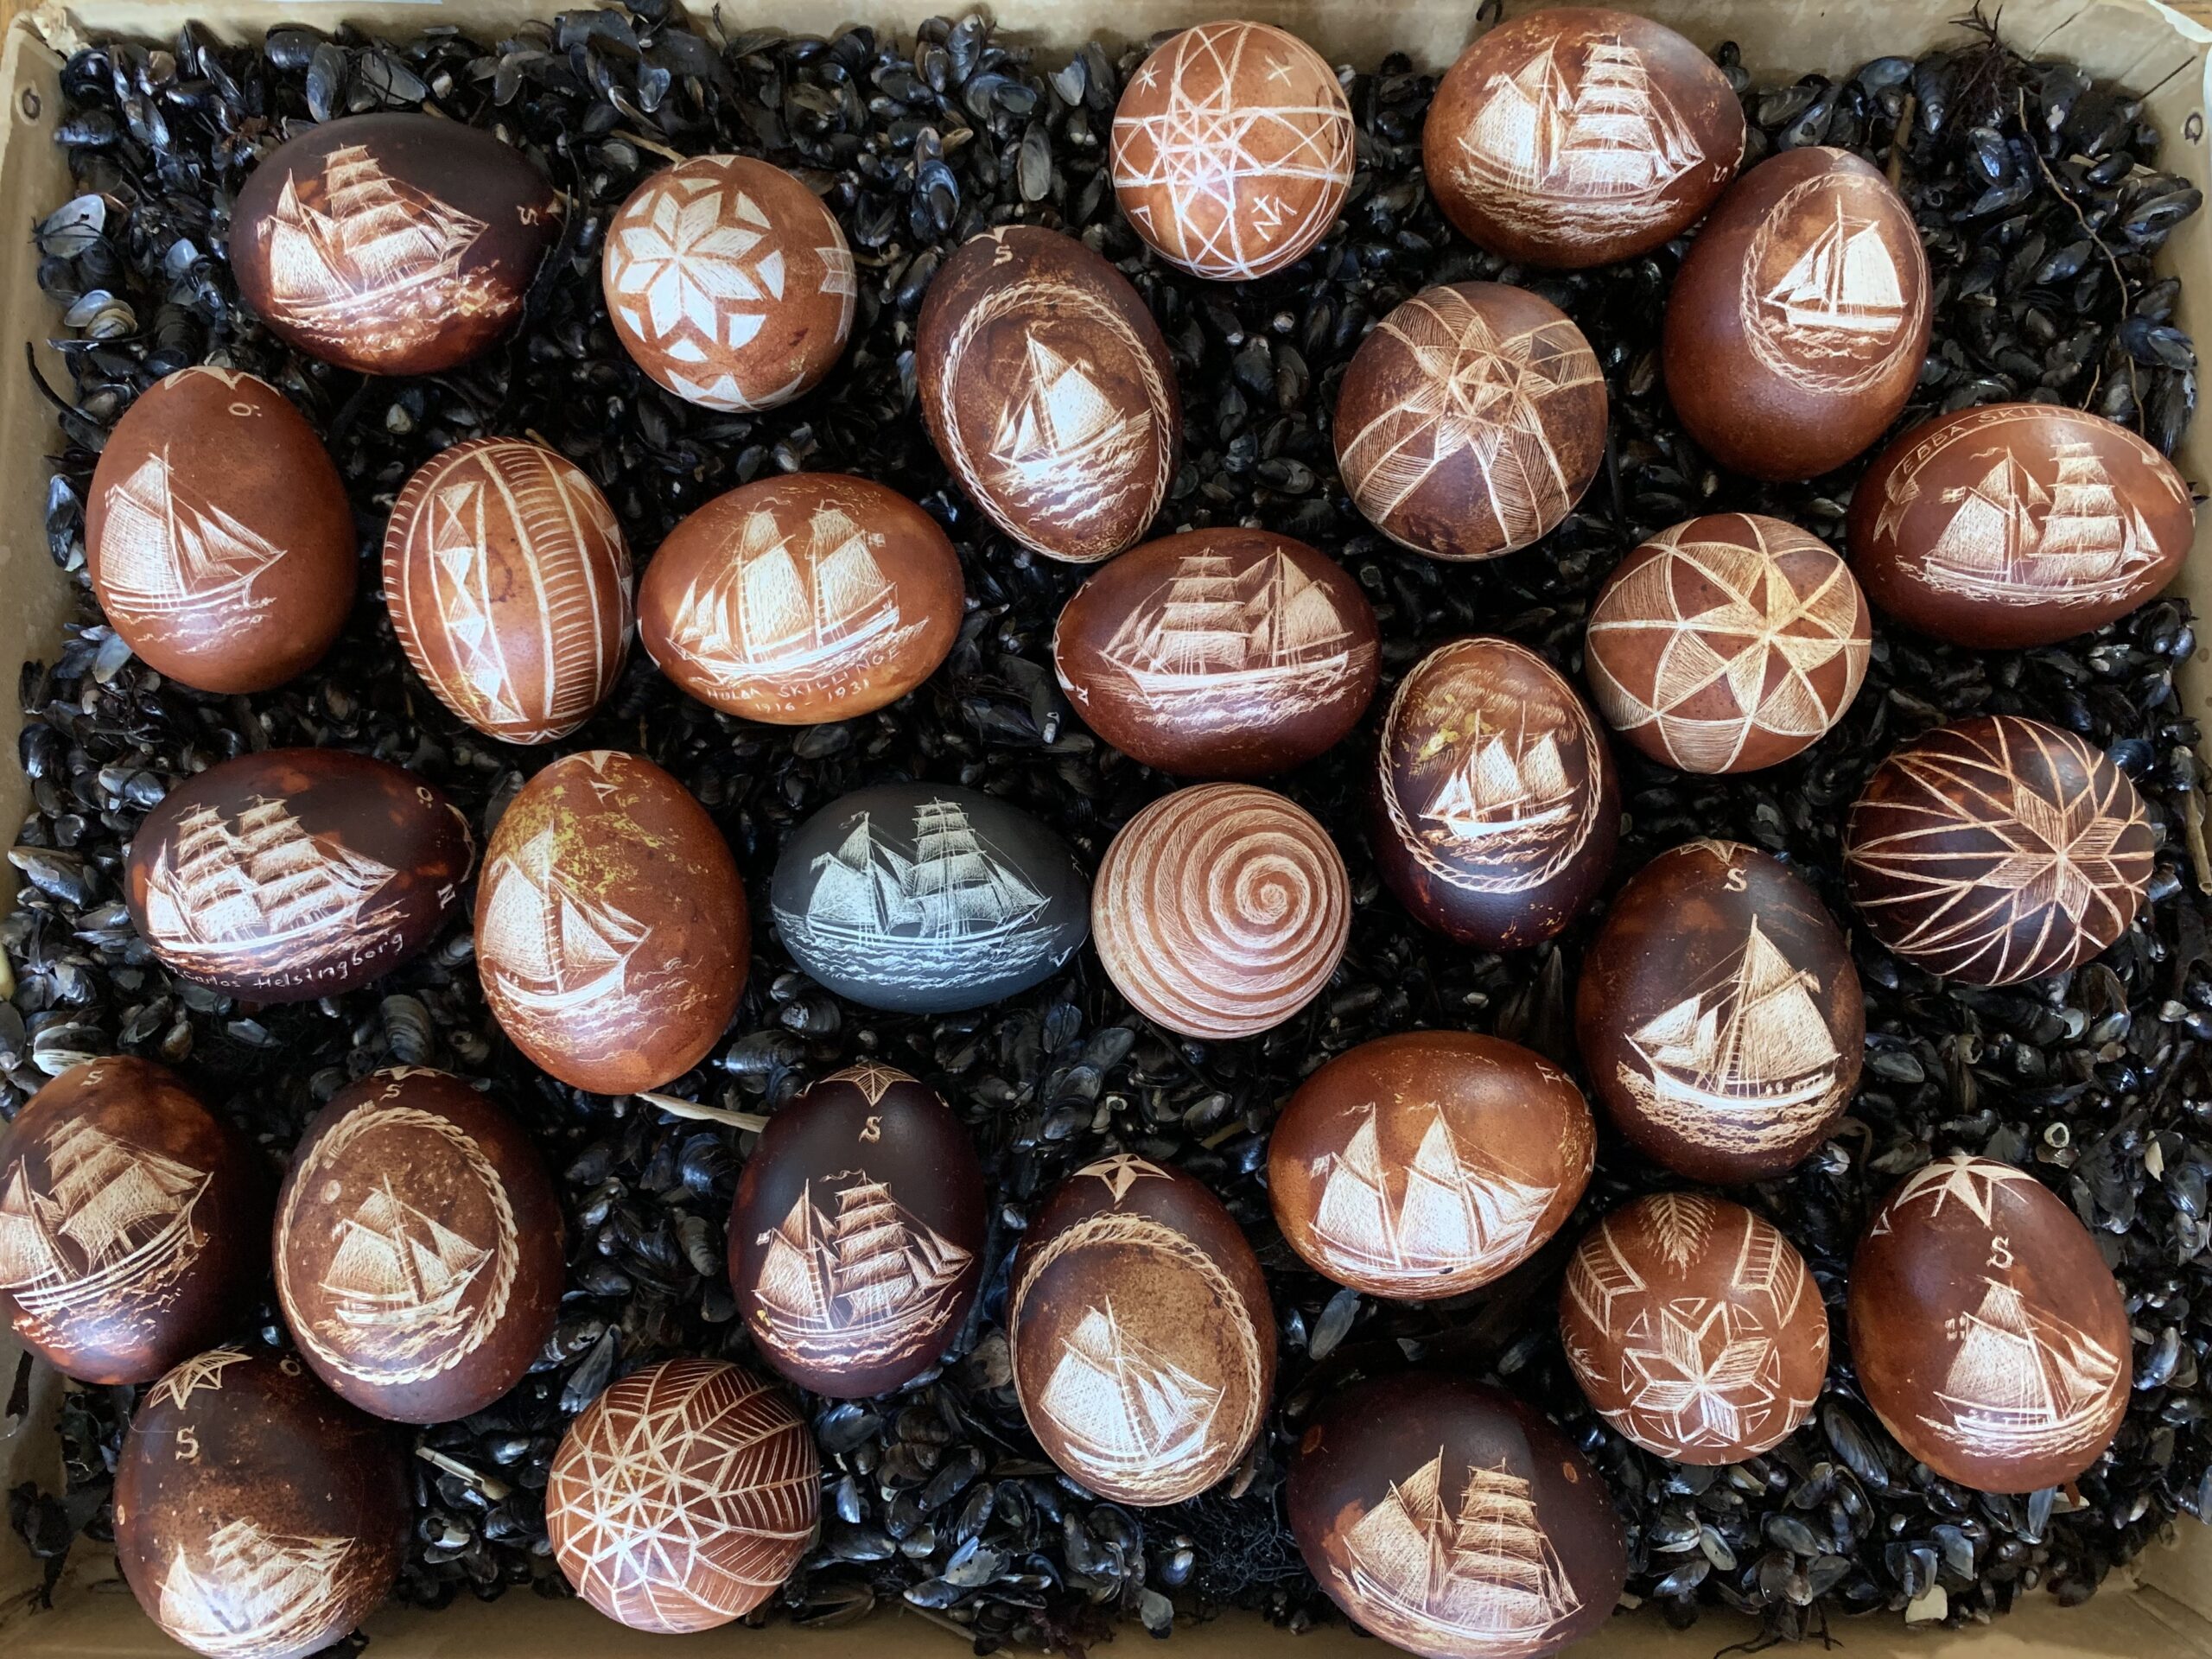 Carved eggs with ship motif by Maria Lancing